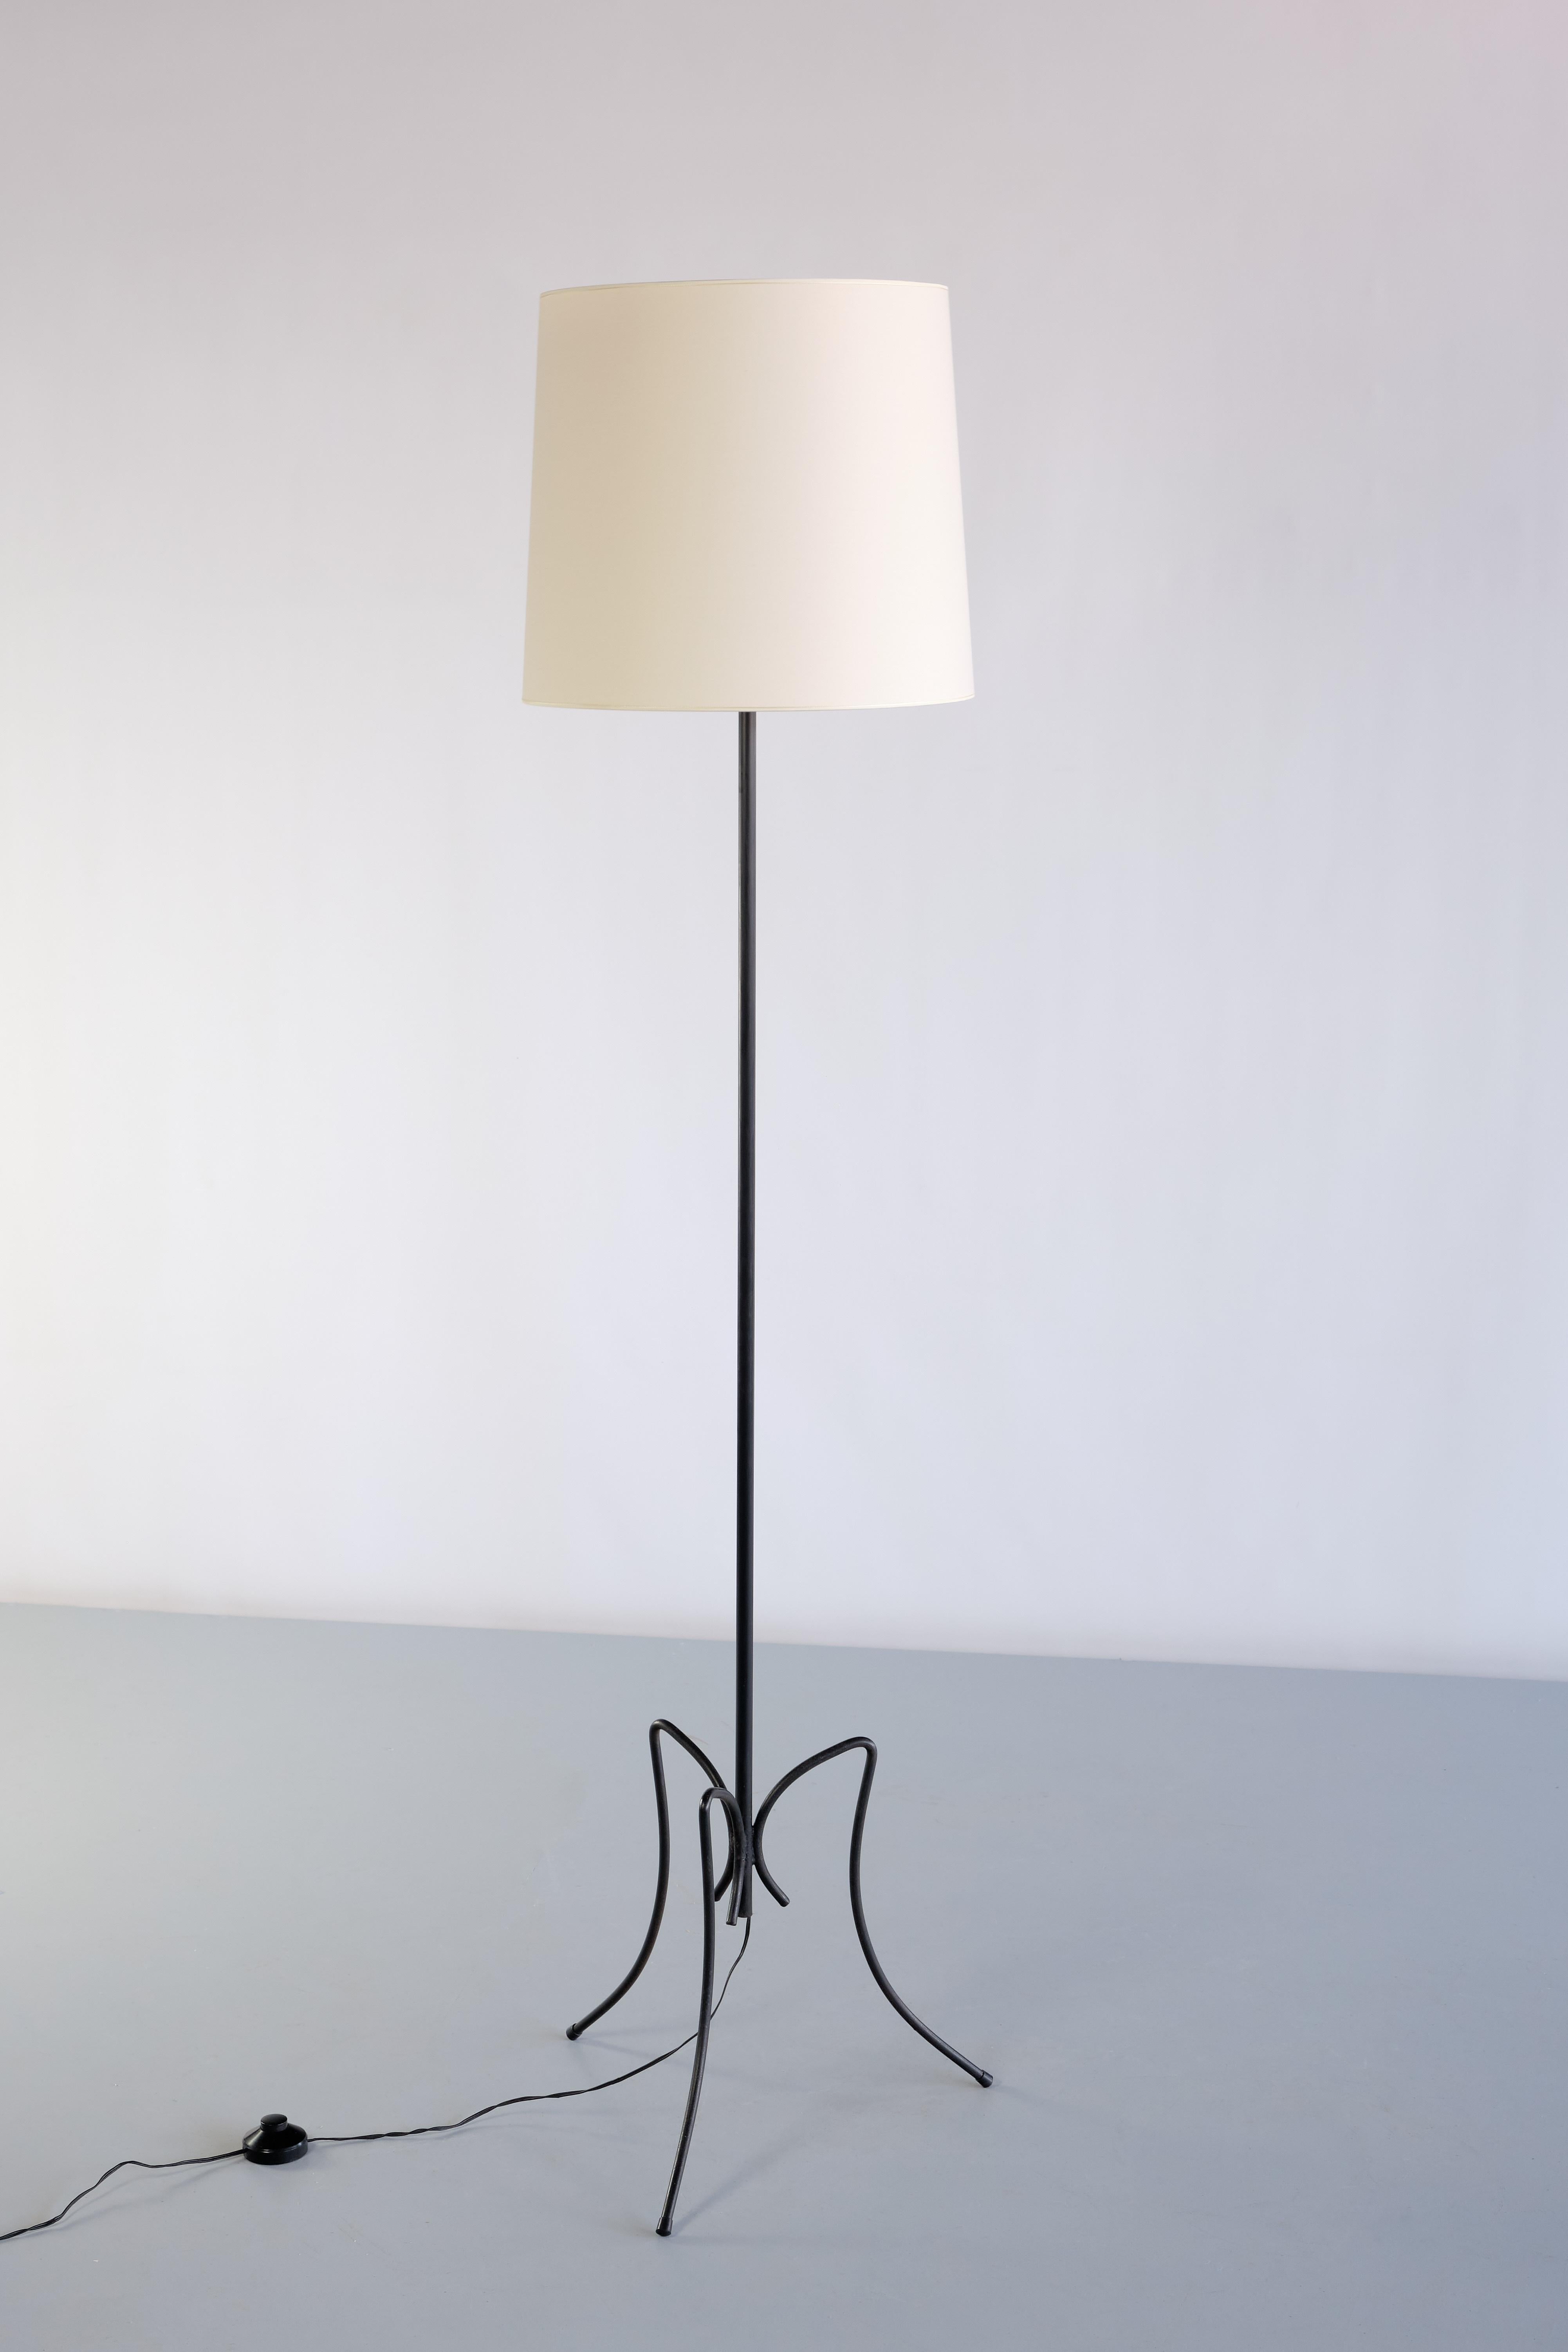 French Modern Three Legged Floor Lamp, Black Iron and Ivory Shade, 1950s For Sale 1